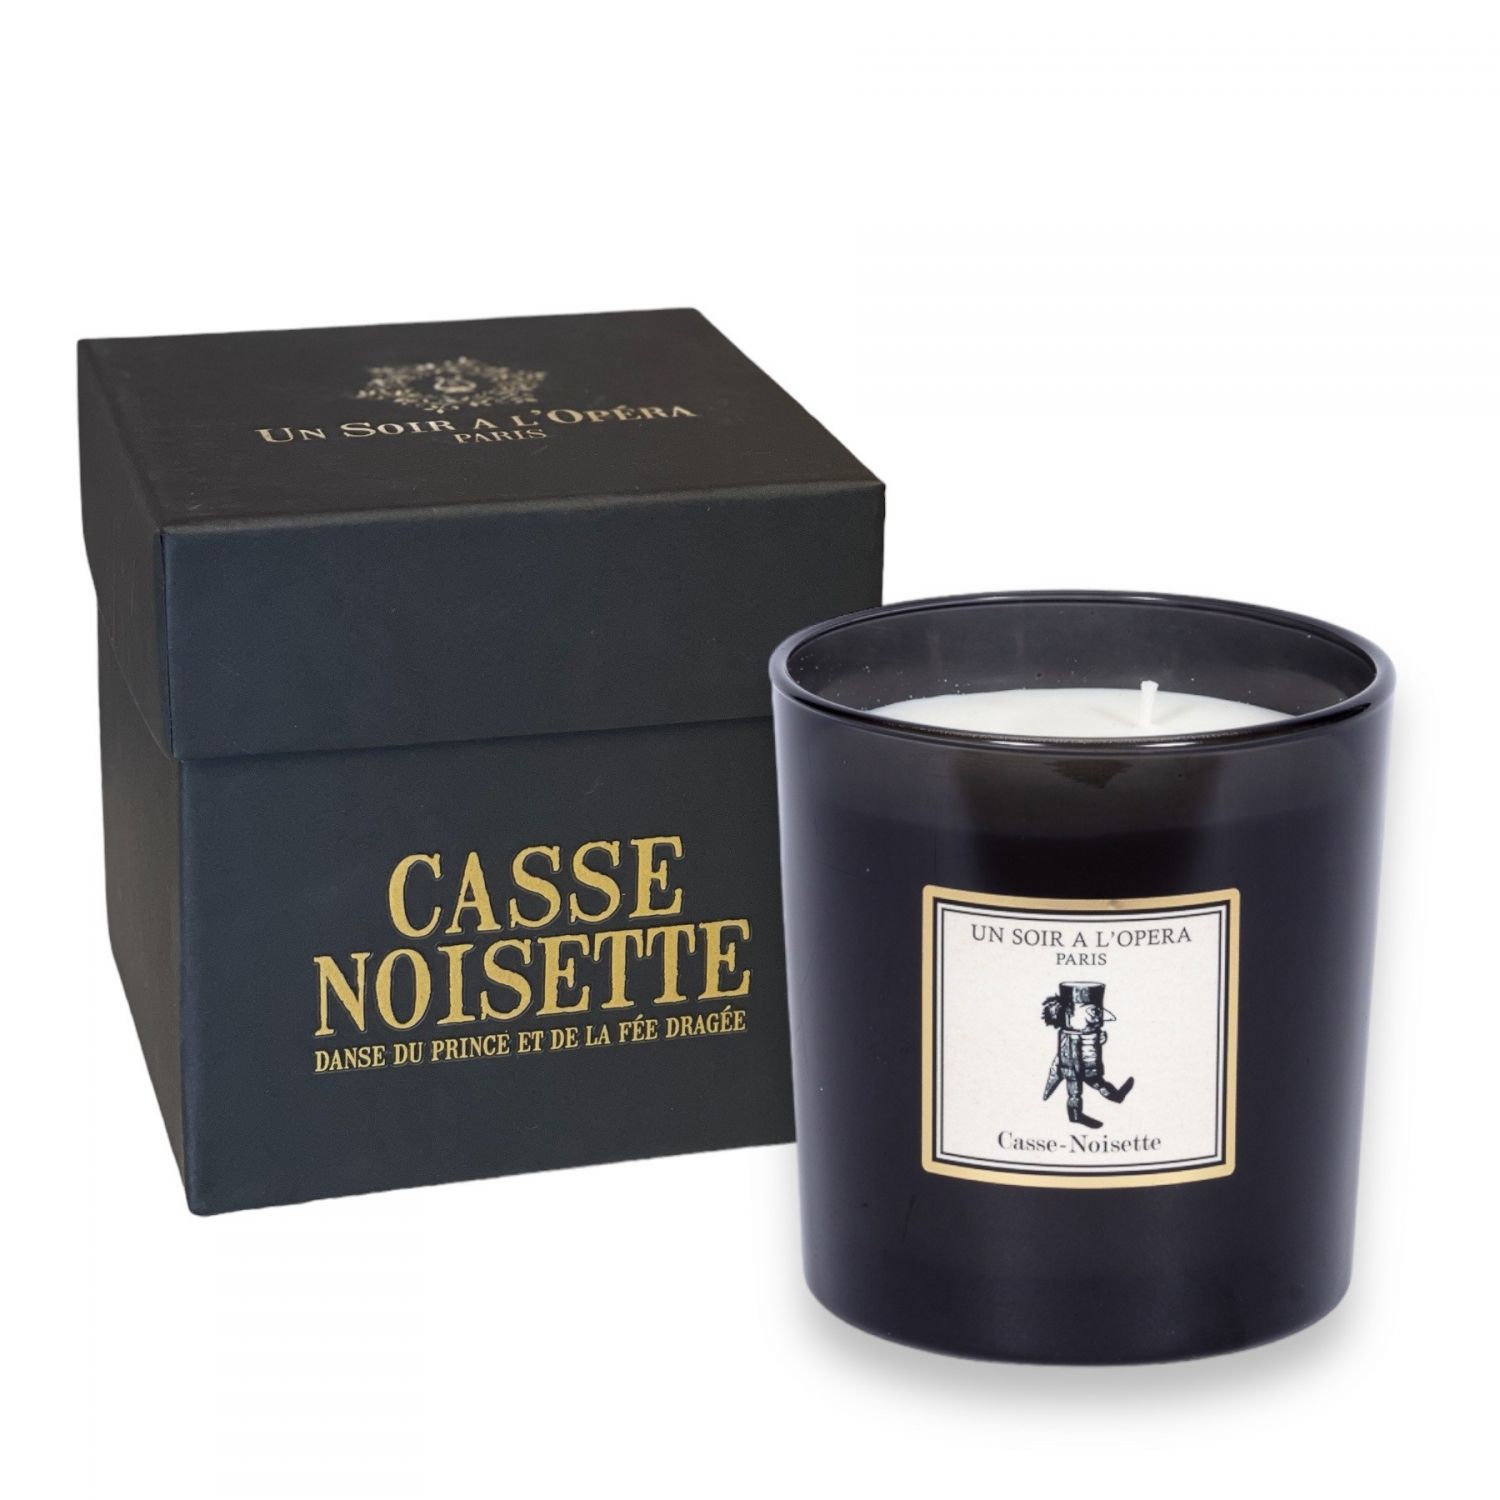 THE NUTCRACKER - Christmas Luxury scented candle 550g - Spruce and gingerbread - 2 units minimum